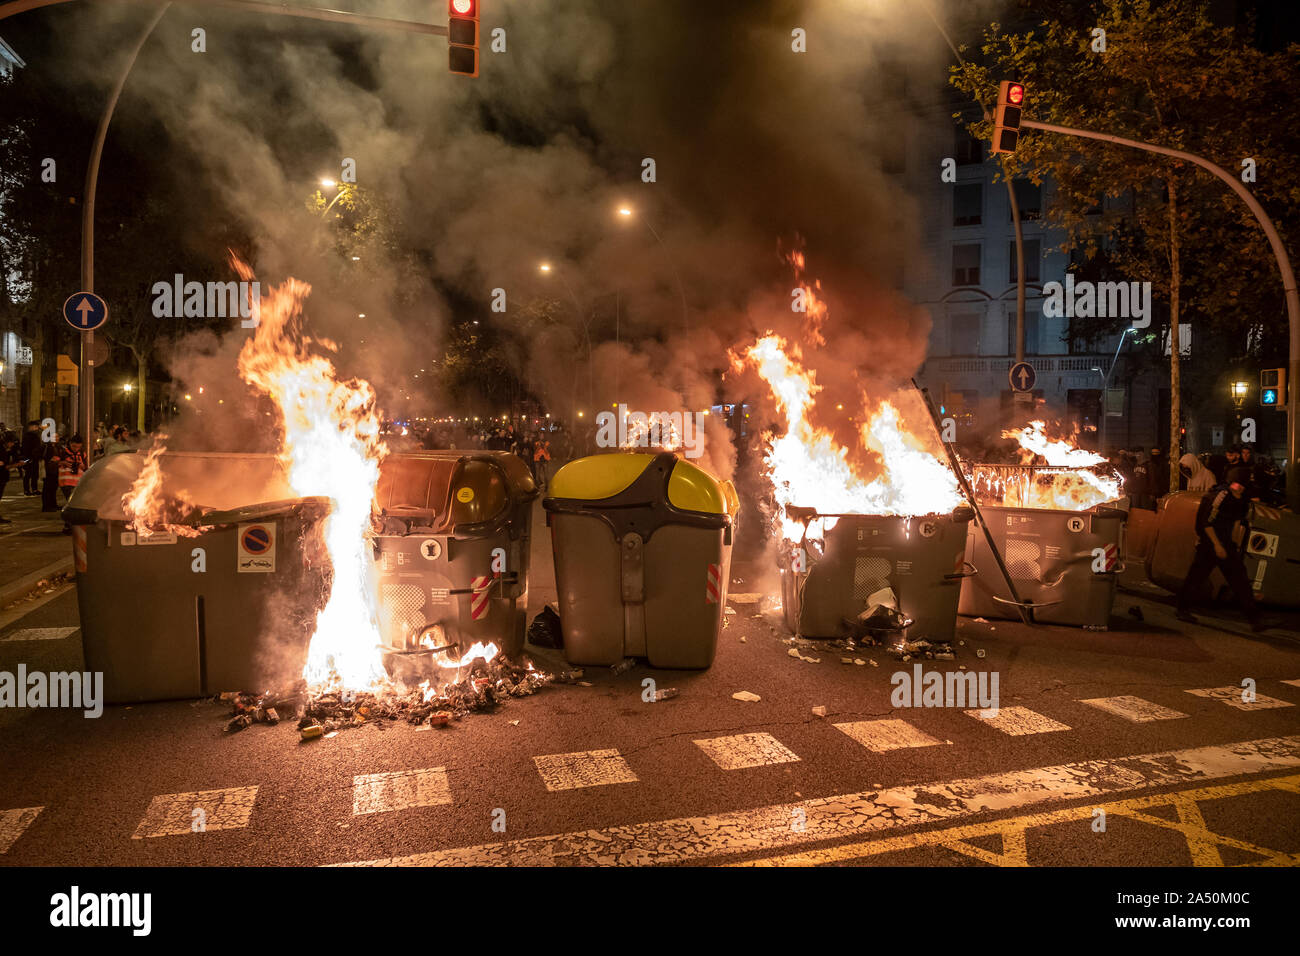 Burning barricades in the middle of the road during the demonstration.Hundreds of protesters concentrated on the Gran Vía Street in Barcelona during the third day of protest following the sentences of the Spanish Supreme Court that condemns Catalan political prisoners to long prison terms. The demonstration culminated in front of the headquarters of the Department of Interior of the Generalitat with heavy police charges and barricades set on fire. Stock Photo